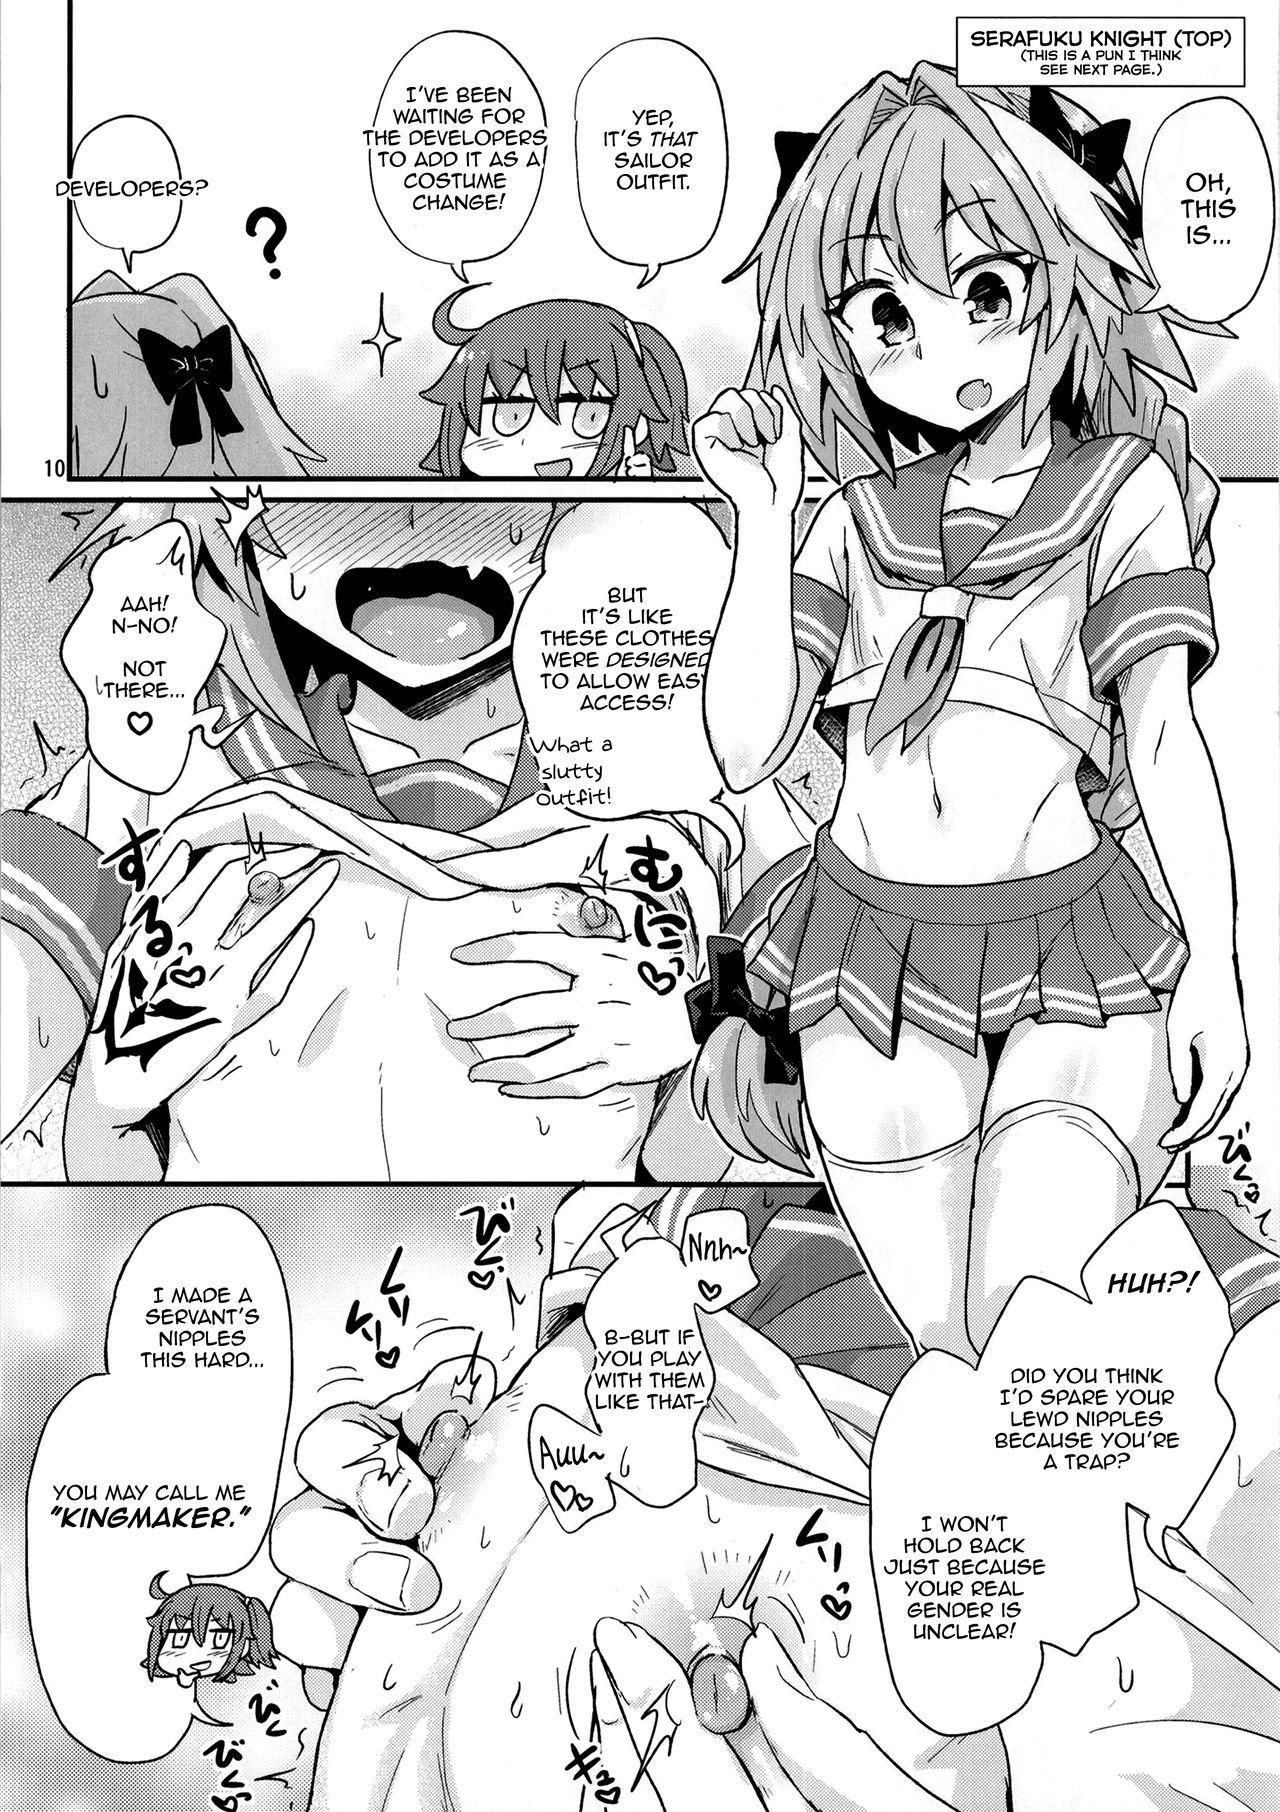 Argenta ASS Horufo-kun 2 - Fate grand order Sexy Whores - Page 10